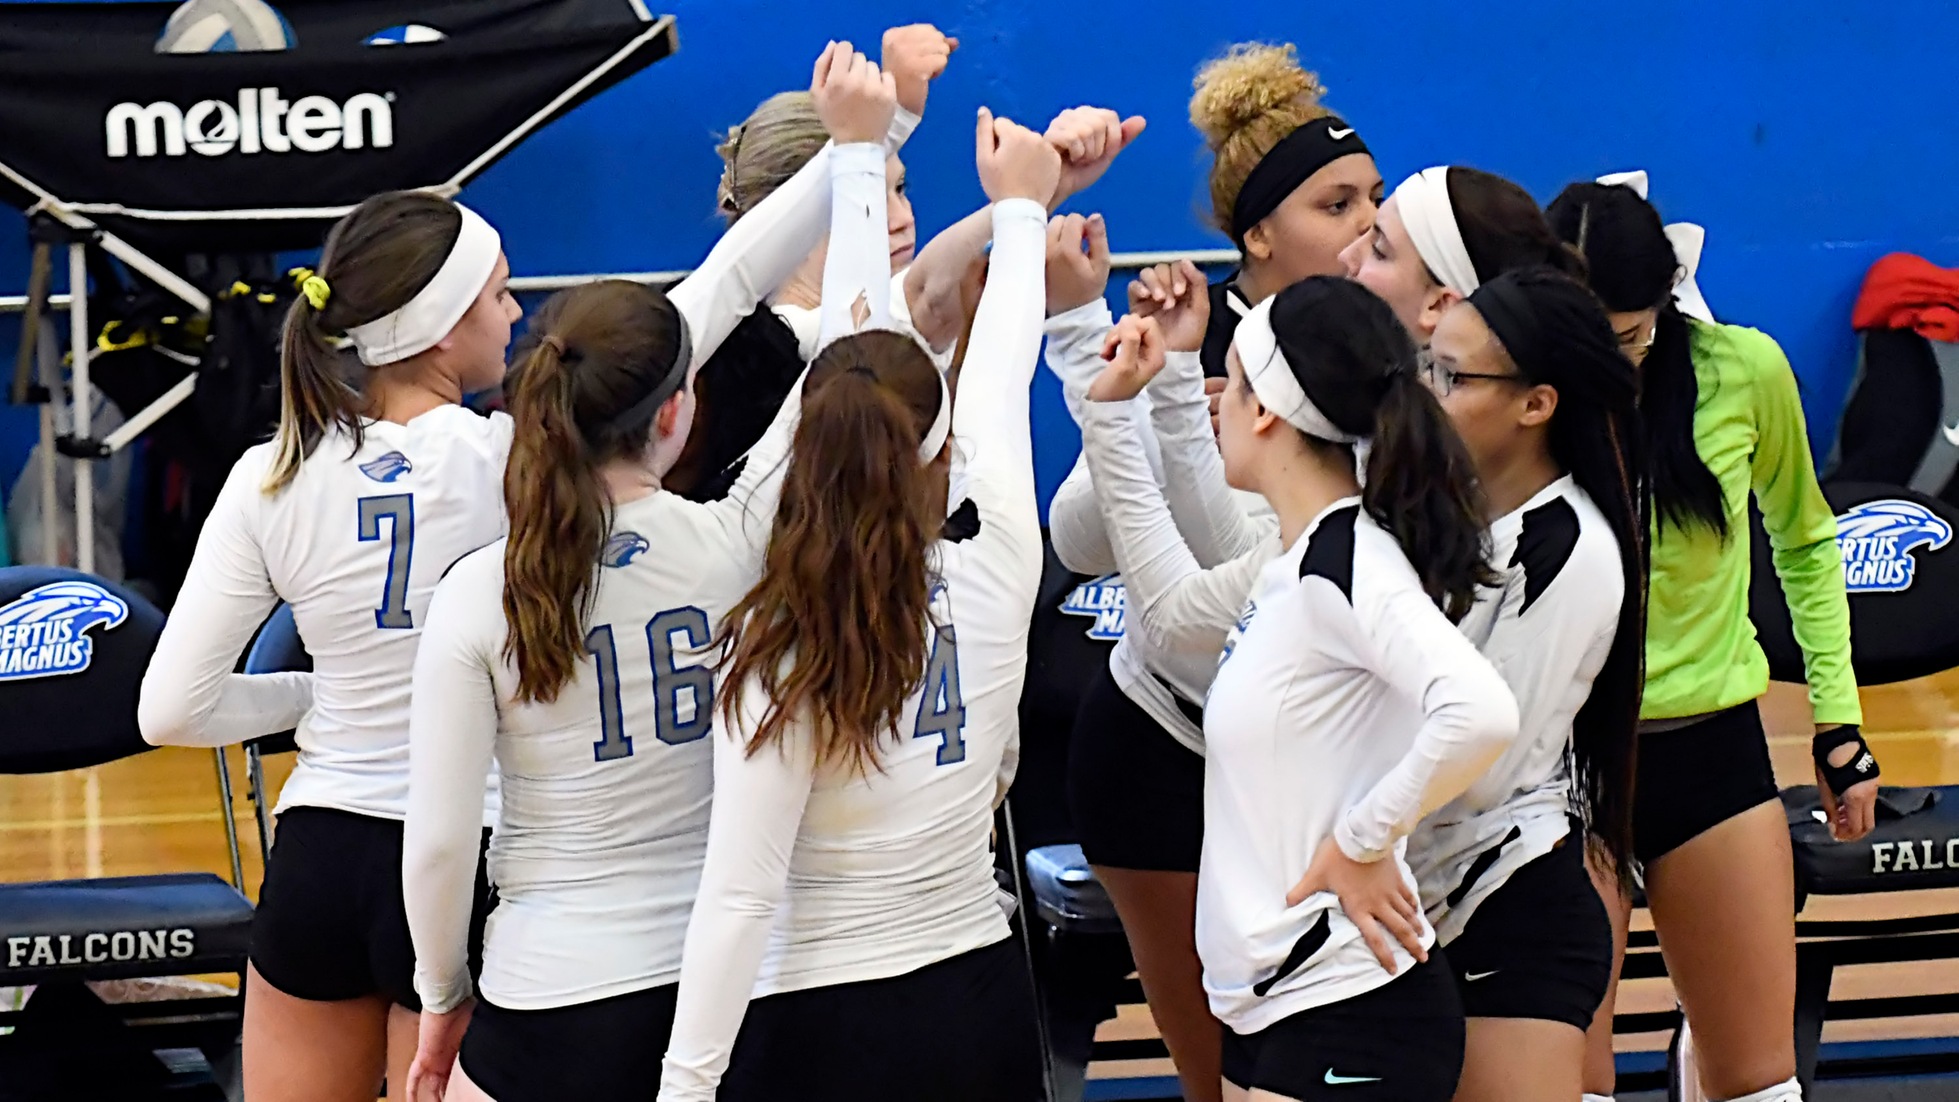 Women's Volleyball Falls at Home to Regis in Conference Play